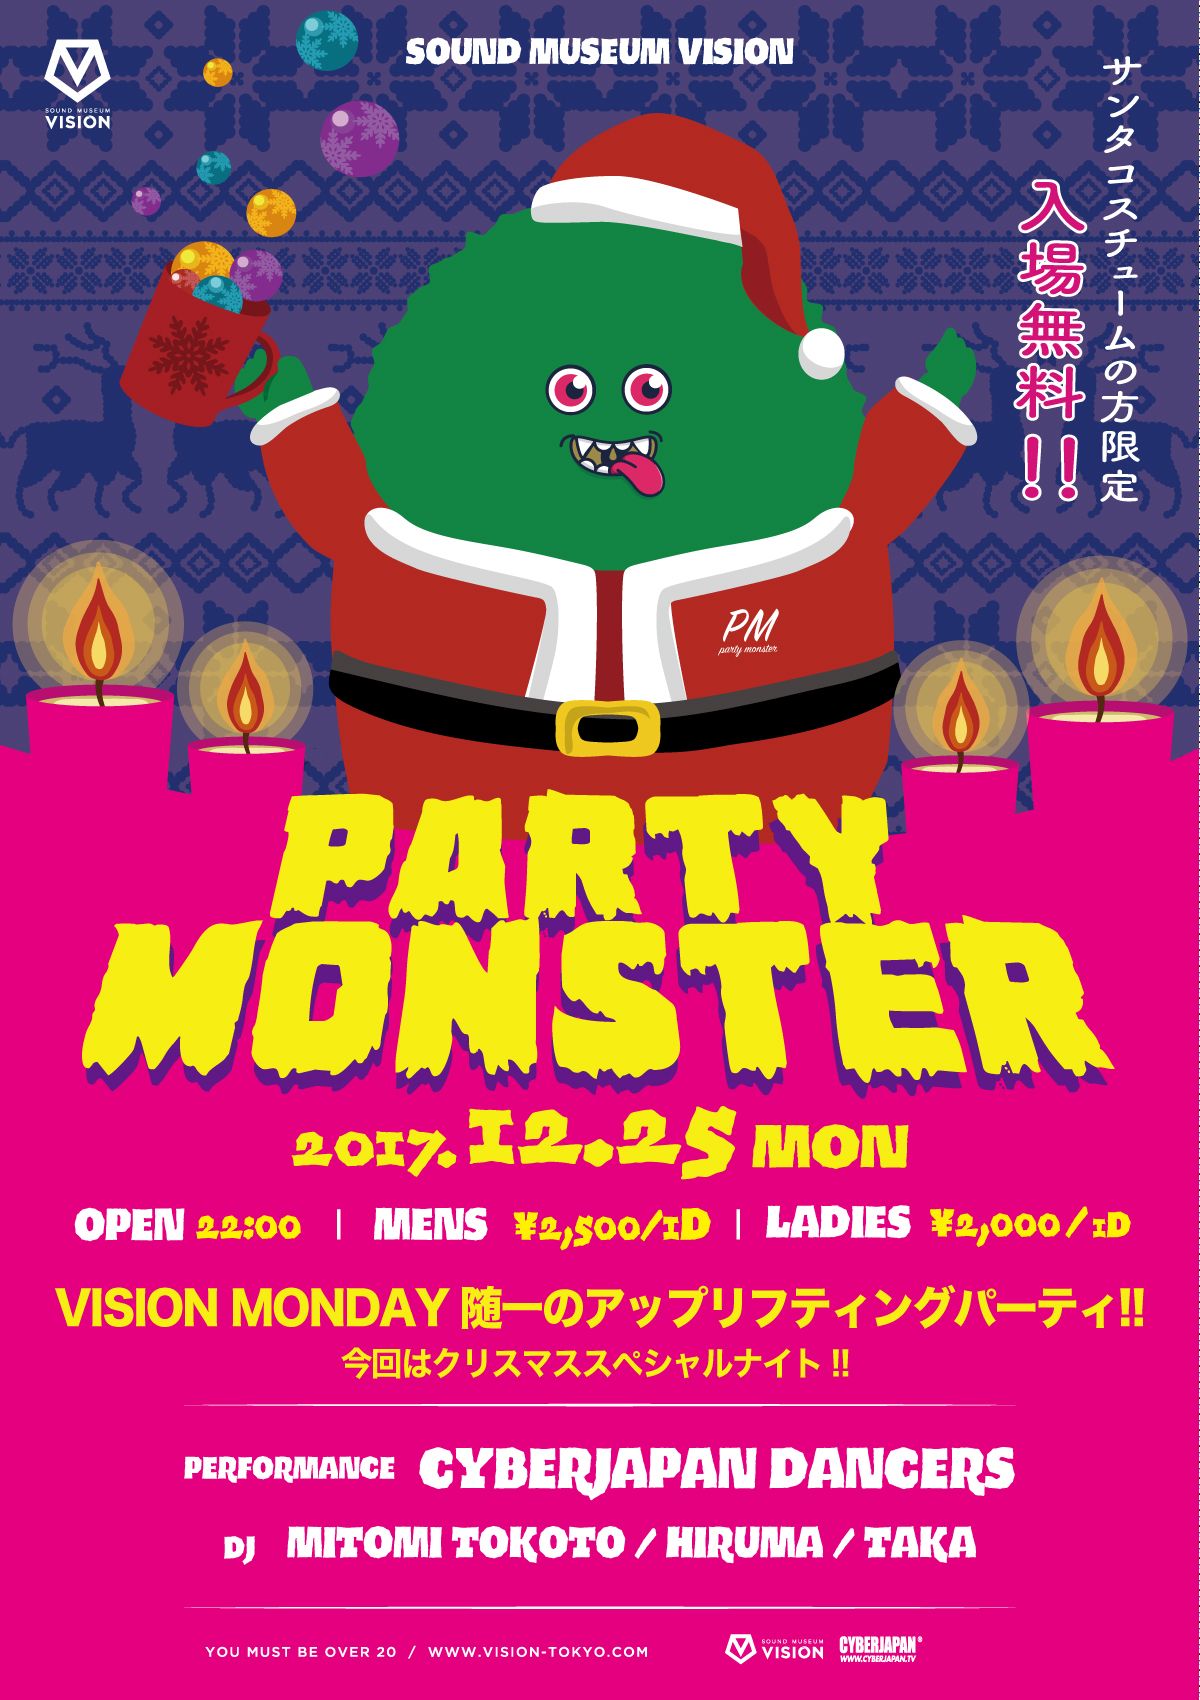 VISION MONDAY presents PARTY MONSTER Xmas SPECIAL